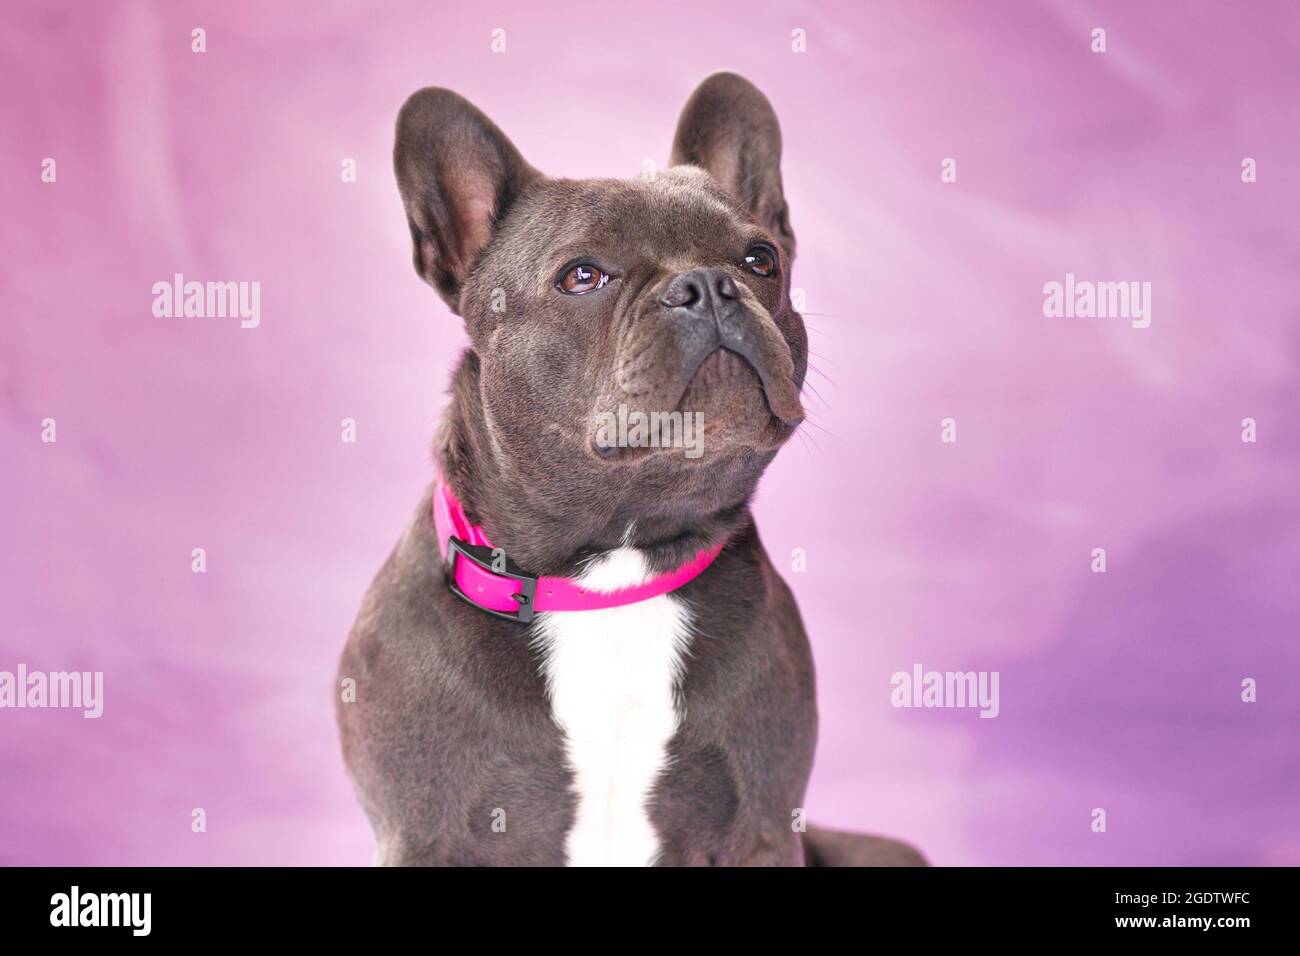 Blue trindle colored French Bulldog dog wearing pink collar in font of violet background Stock Photo